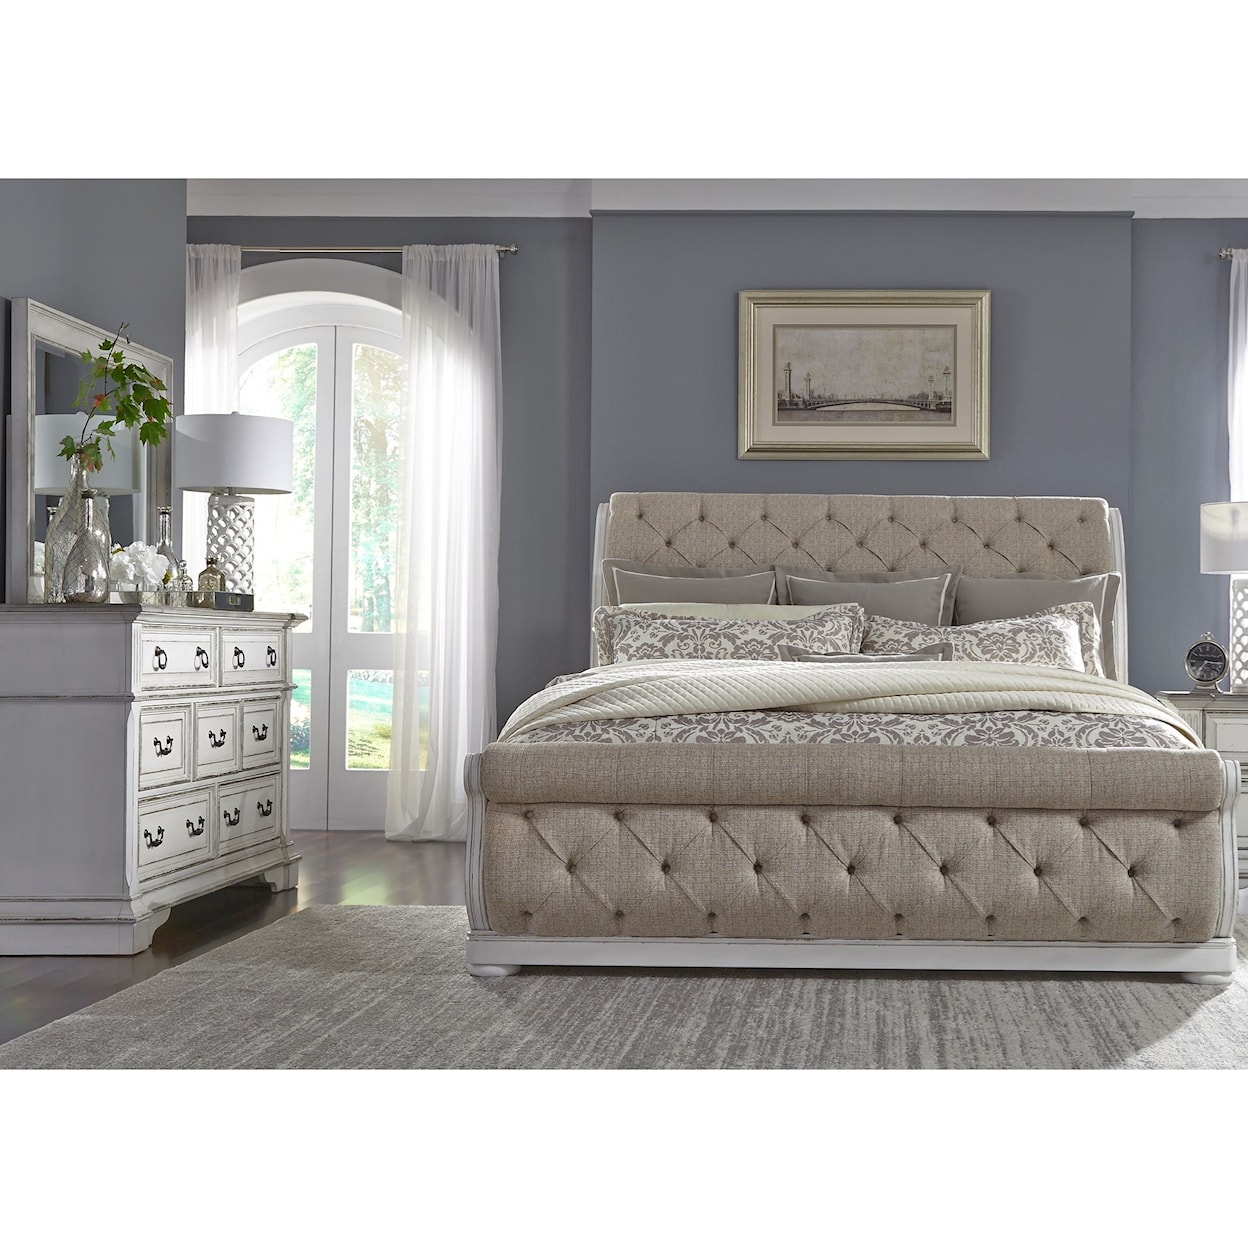 Libby Abbey Park 3-Piece Upholstered Queen Sleigh Bedroom Set